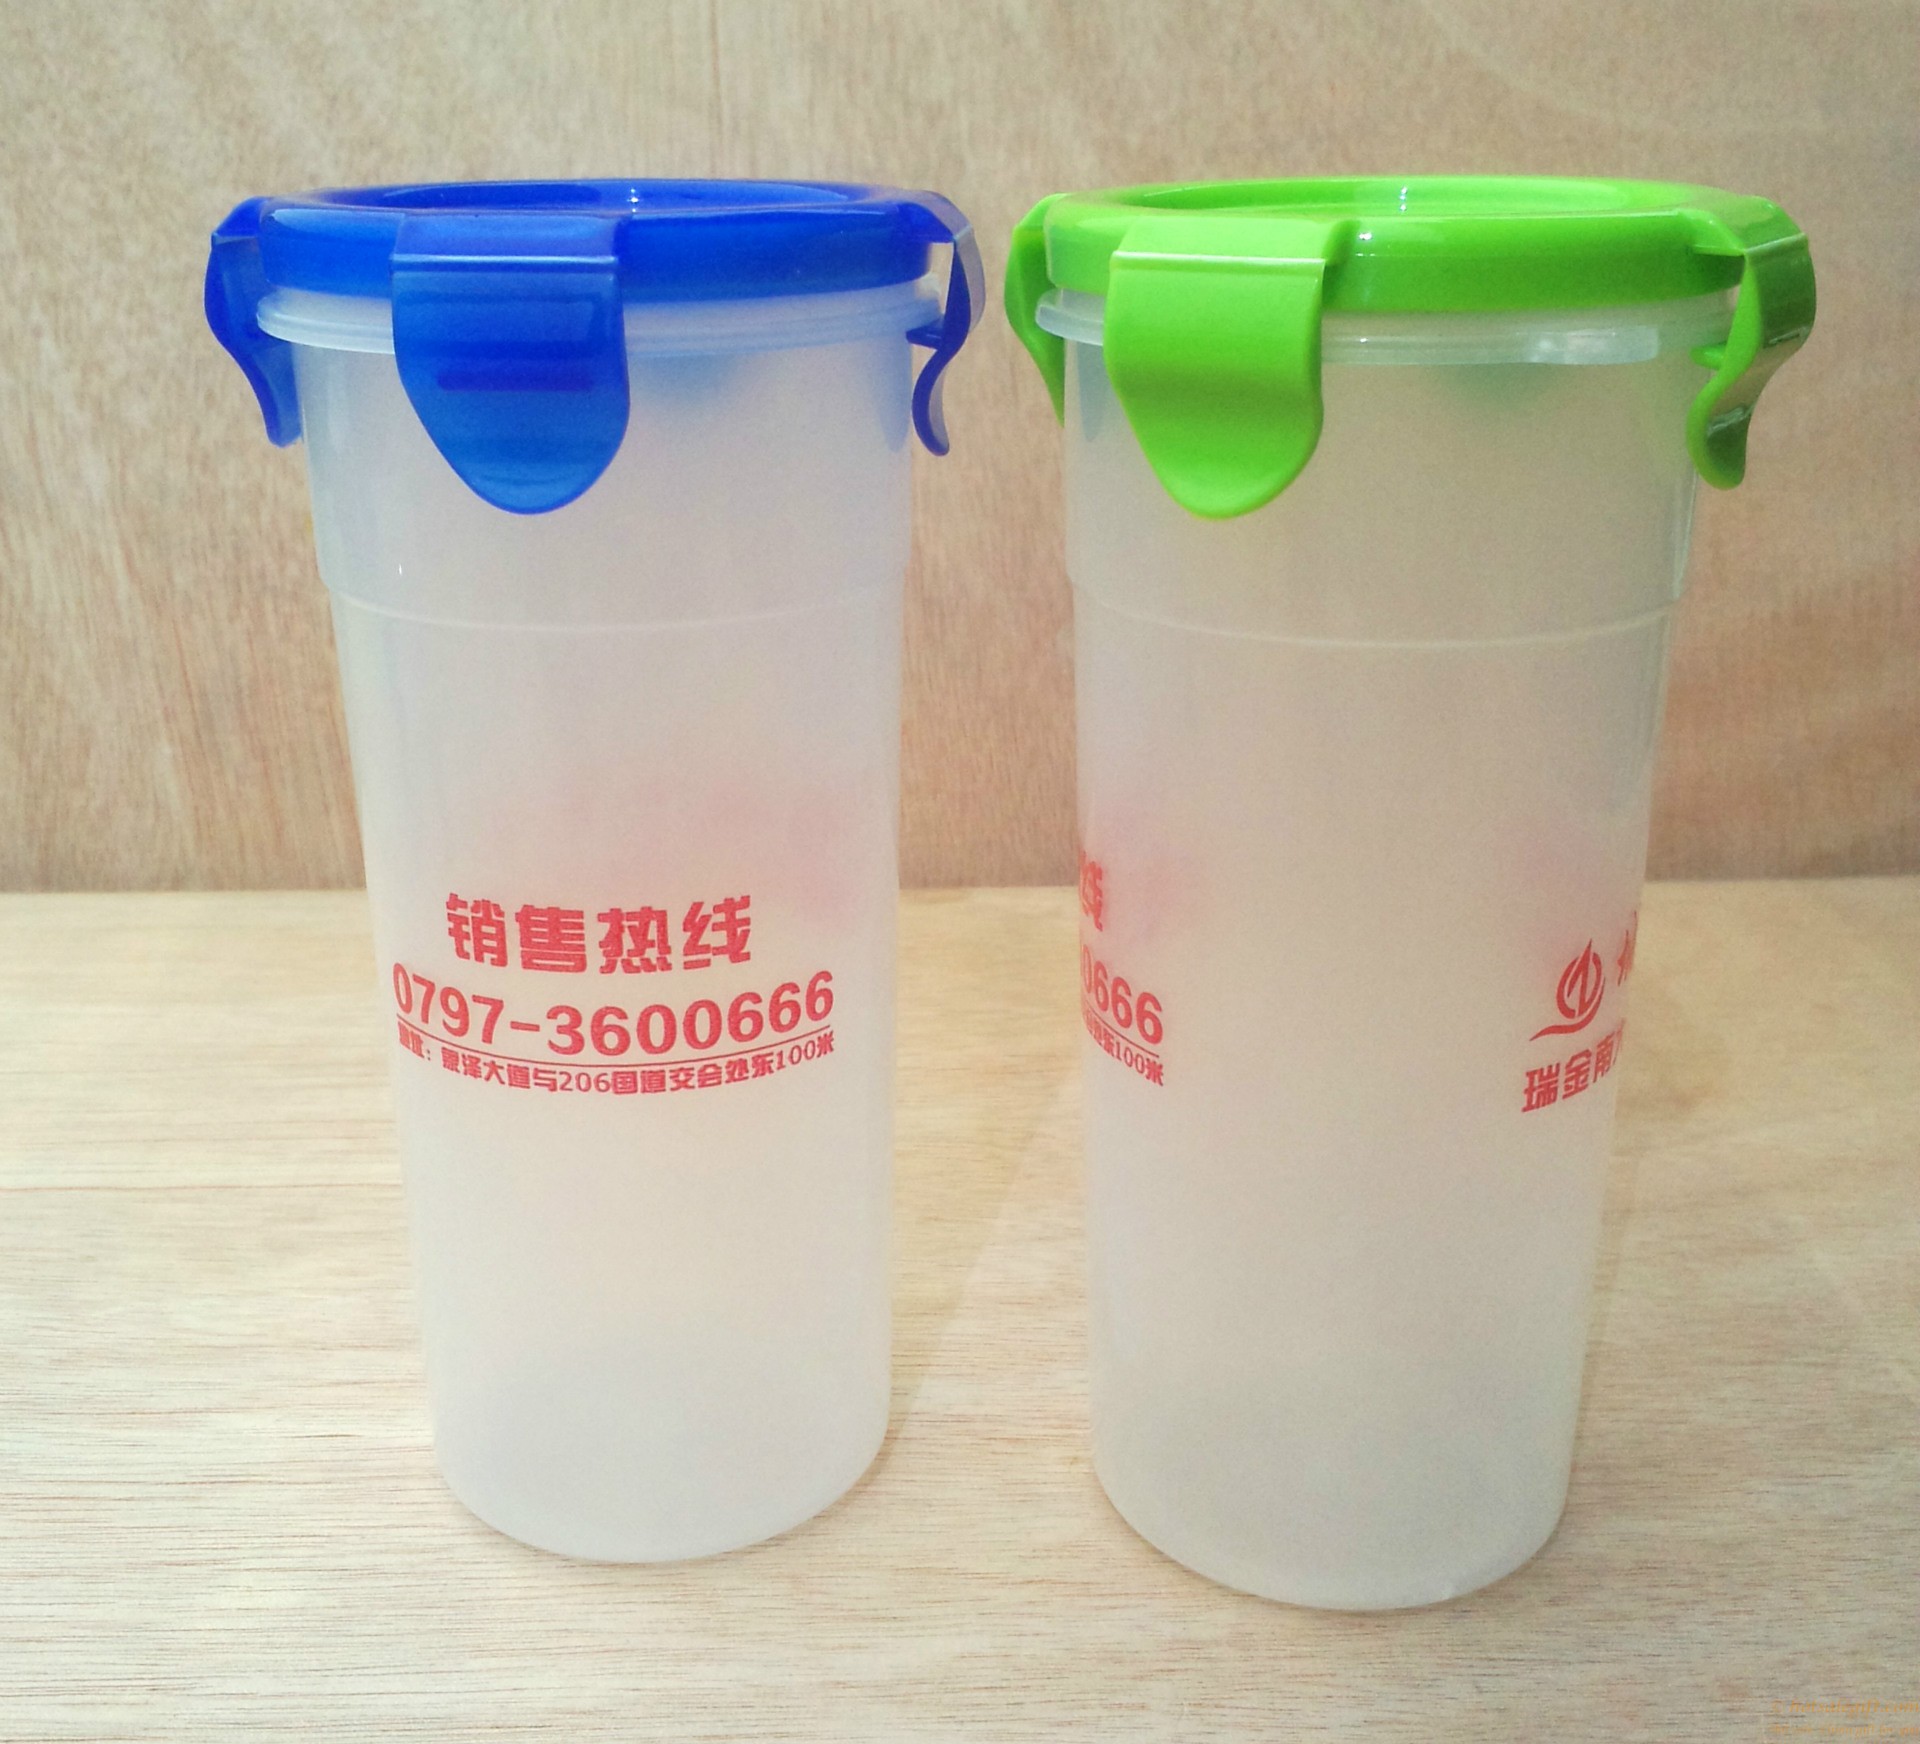 hotsalegift double plastic cups creative promotional gifts advertising water bottle printed logo 1